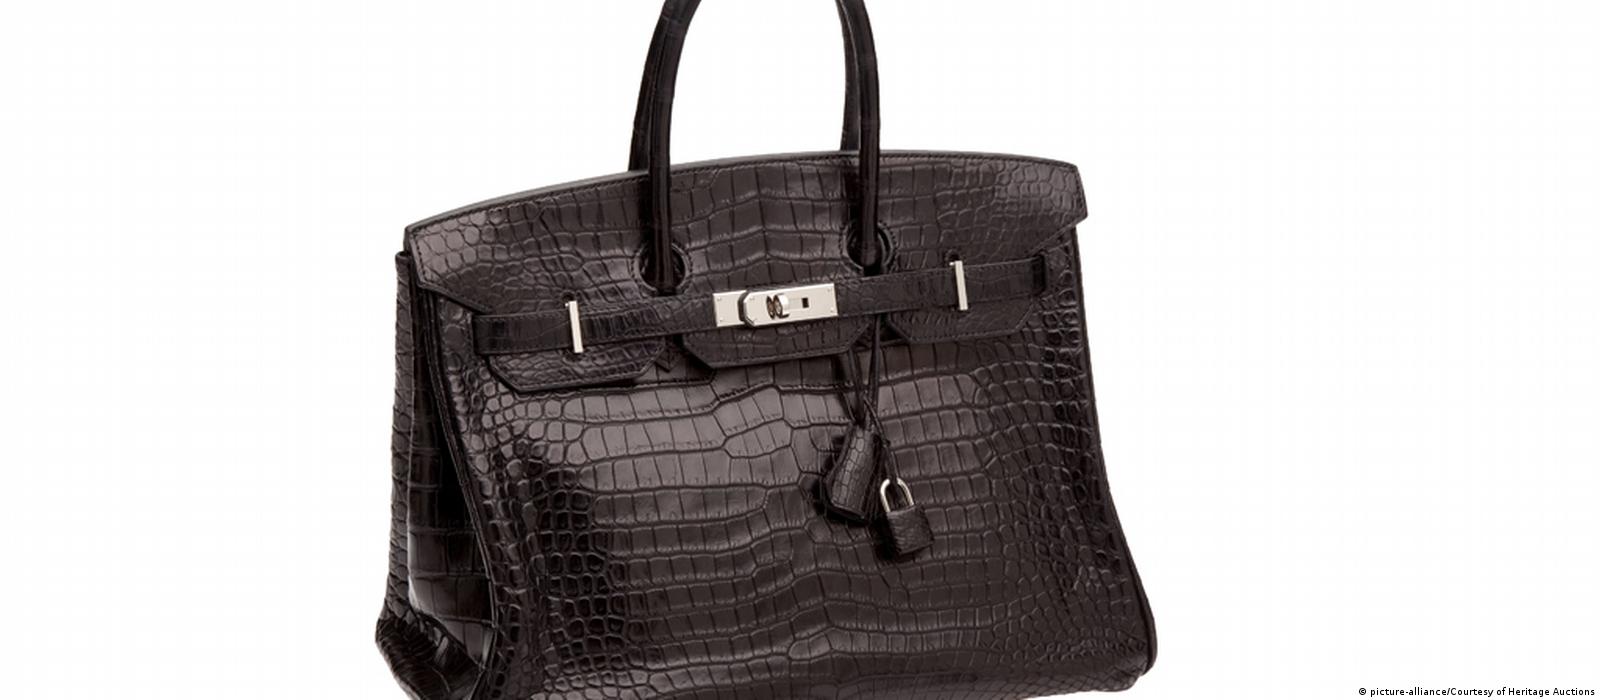 Actress Birkin asks Hermes to remove her name from croc  bag, Europe